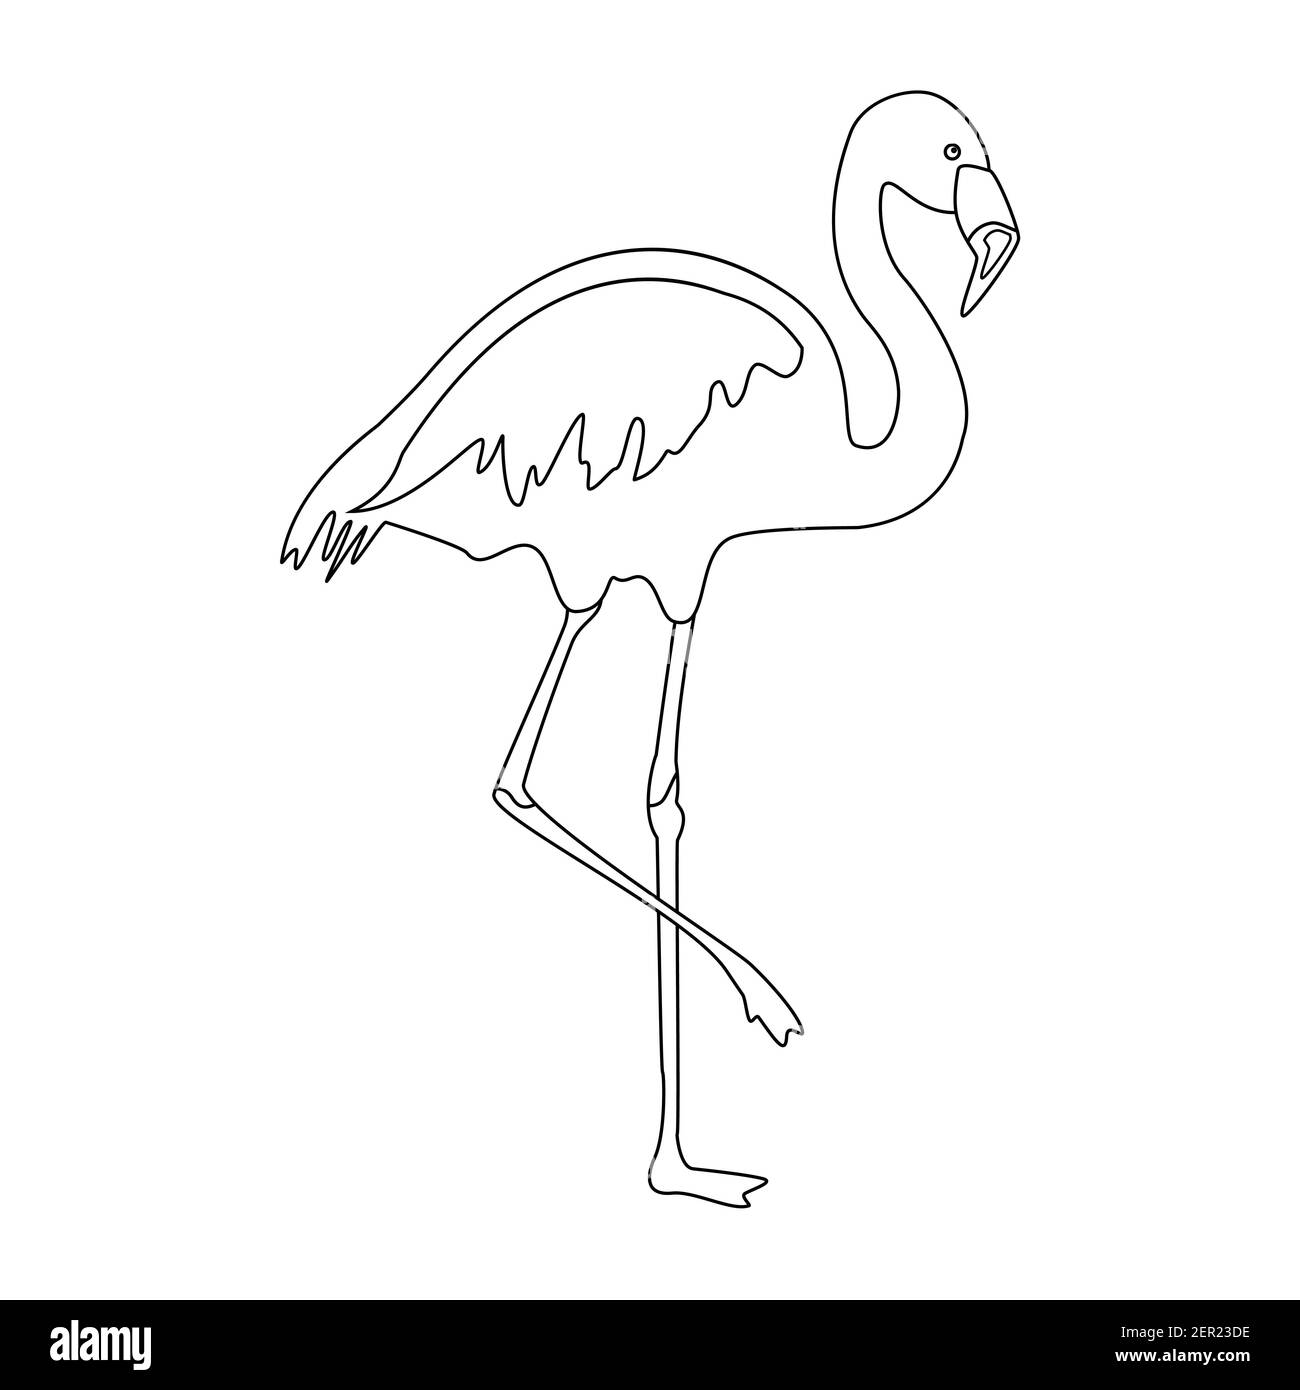 How To Draw A Flamingo Step by Step Drawing Guide by Dawn  DragoArt